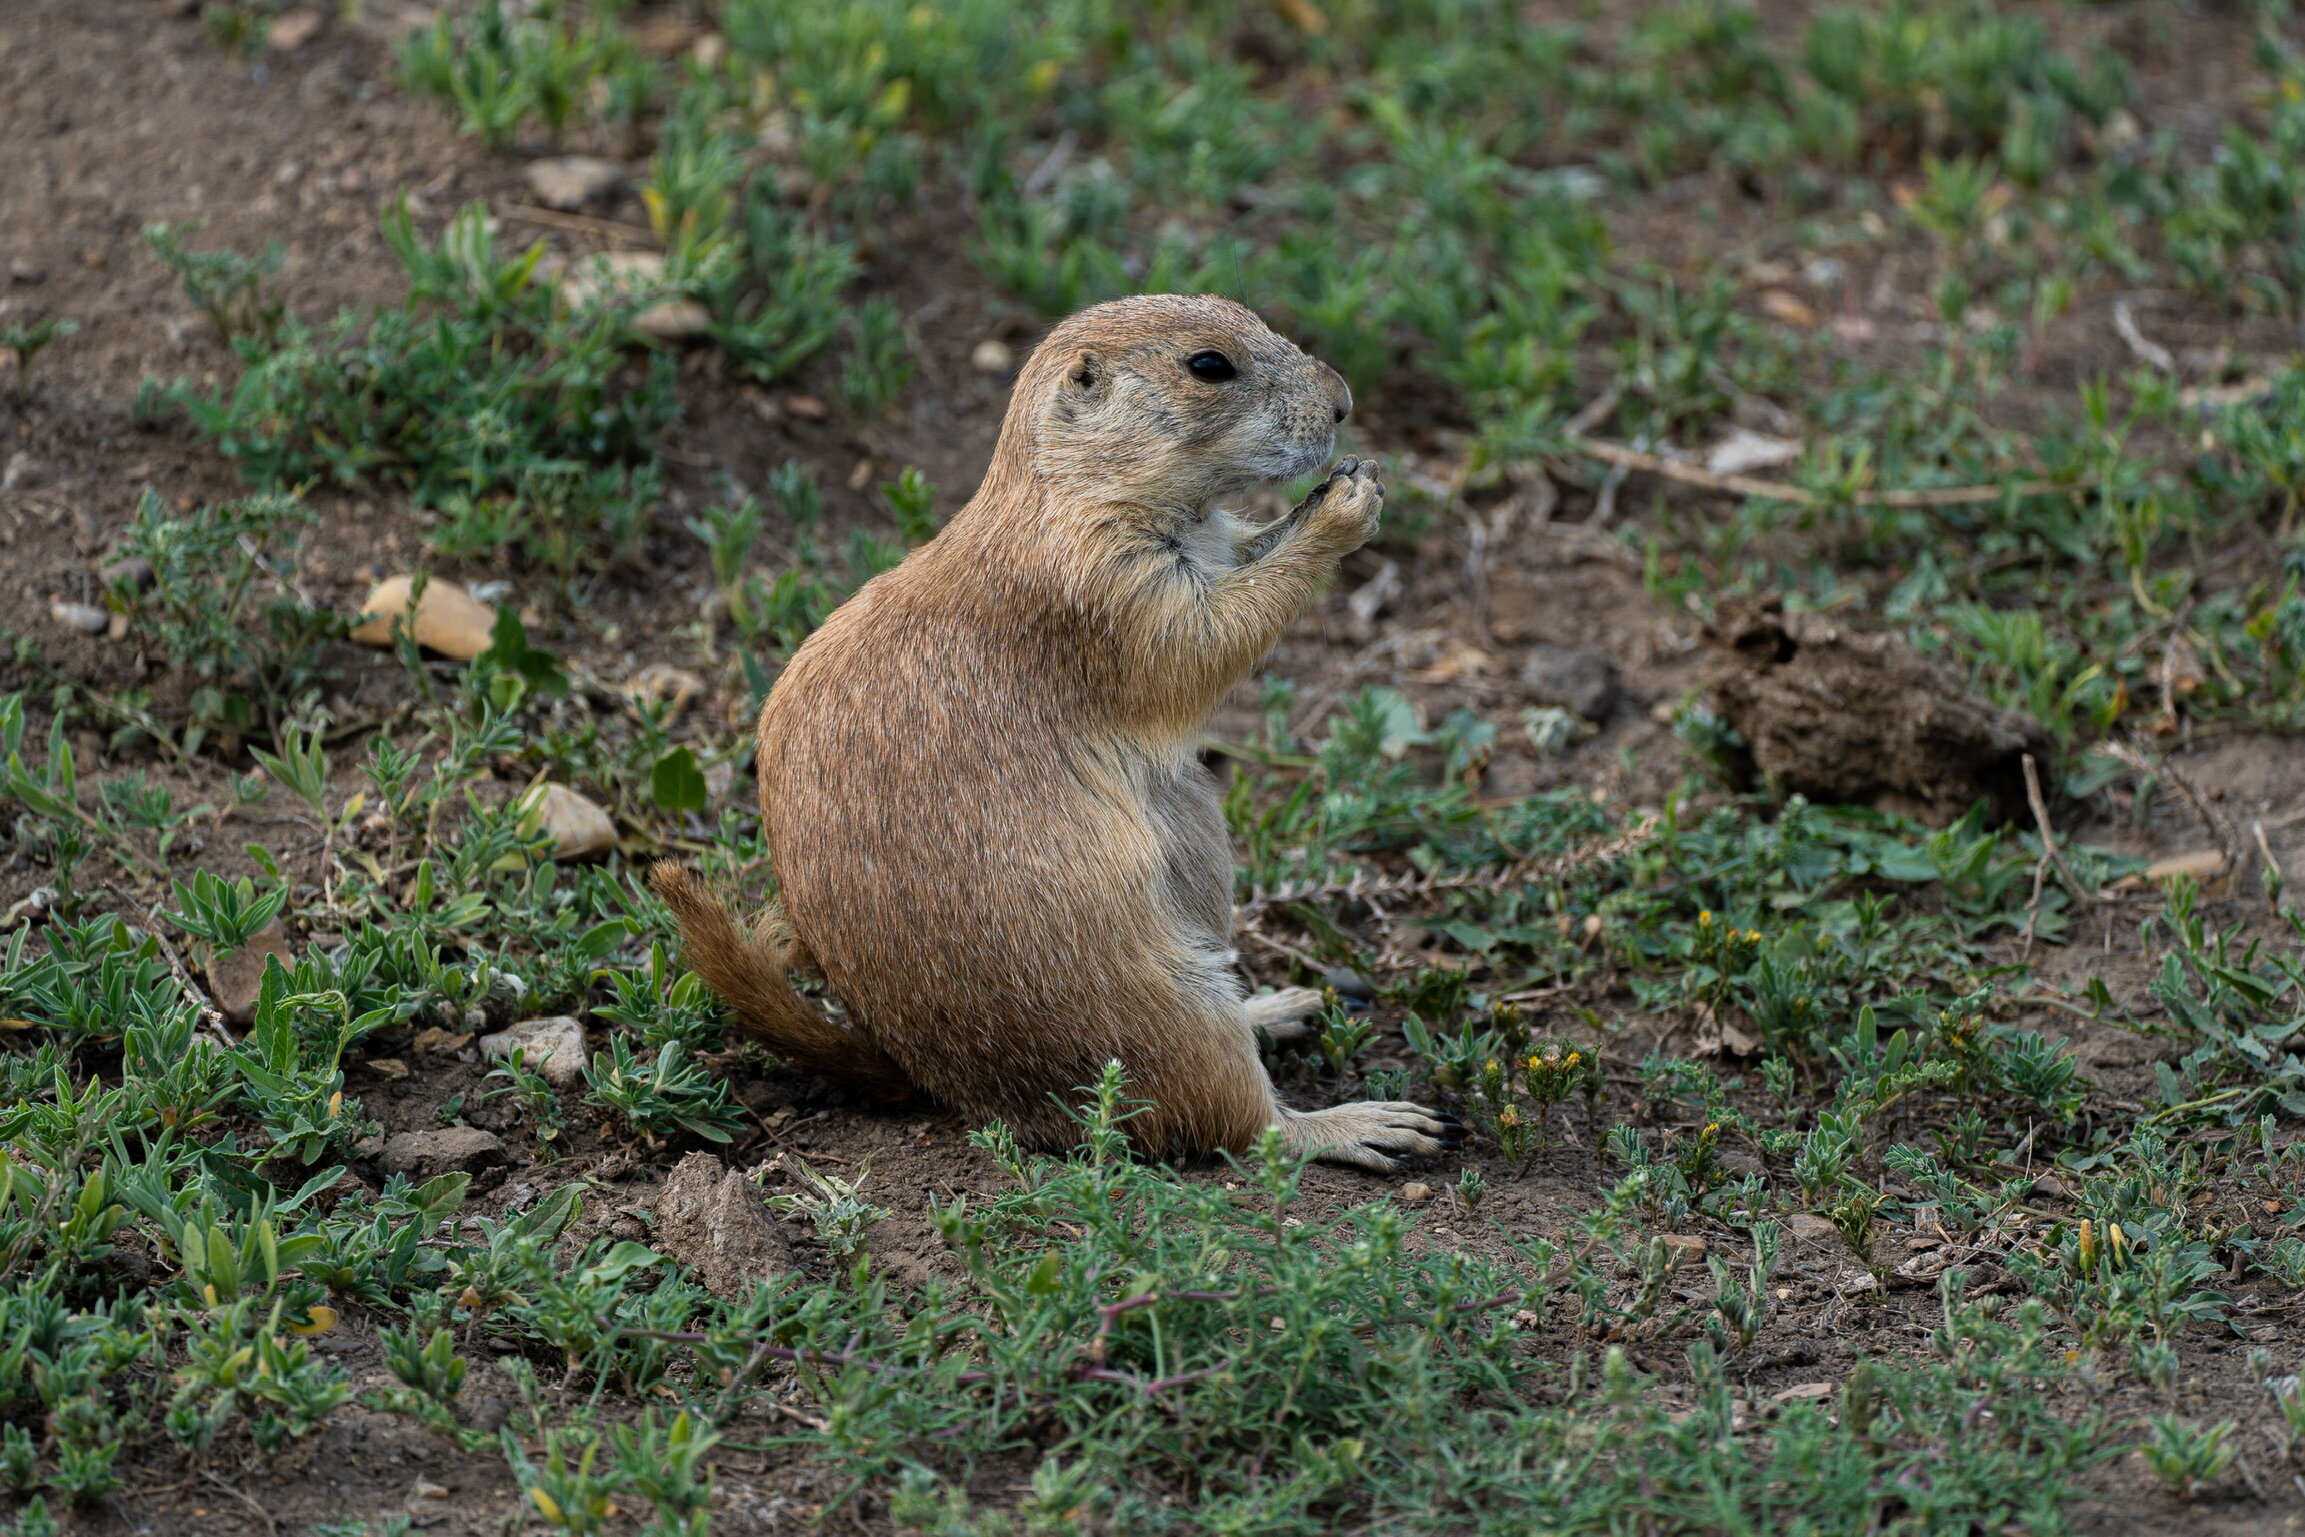  We had not been in the park very long when we came upon a prarie dog  town —which is the name for a colony of prarie dogs. This particular one decided to have a seat before enjoying his lunch.  